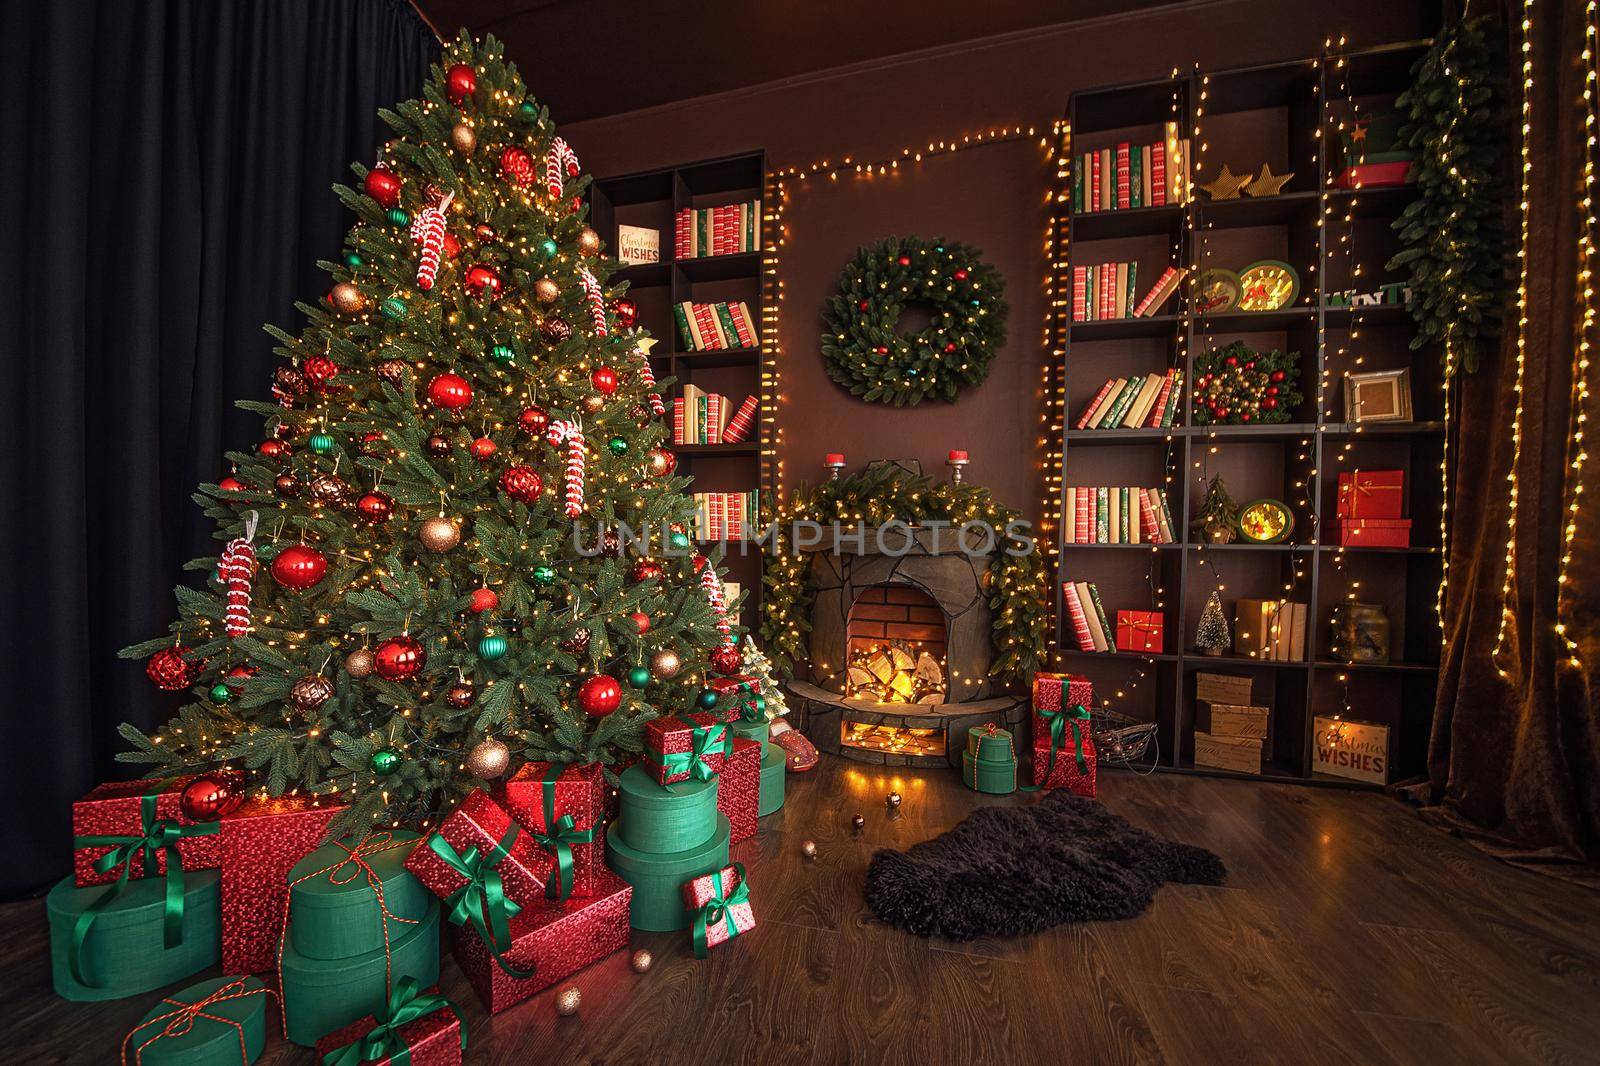 Stylish interior of room with beautiful Christmas fir tree and decorative fireplace by Studio_SOK